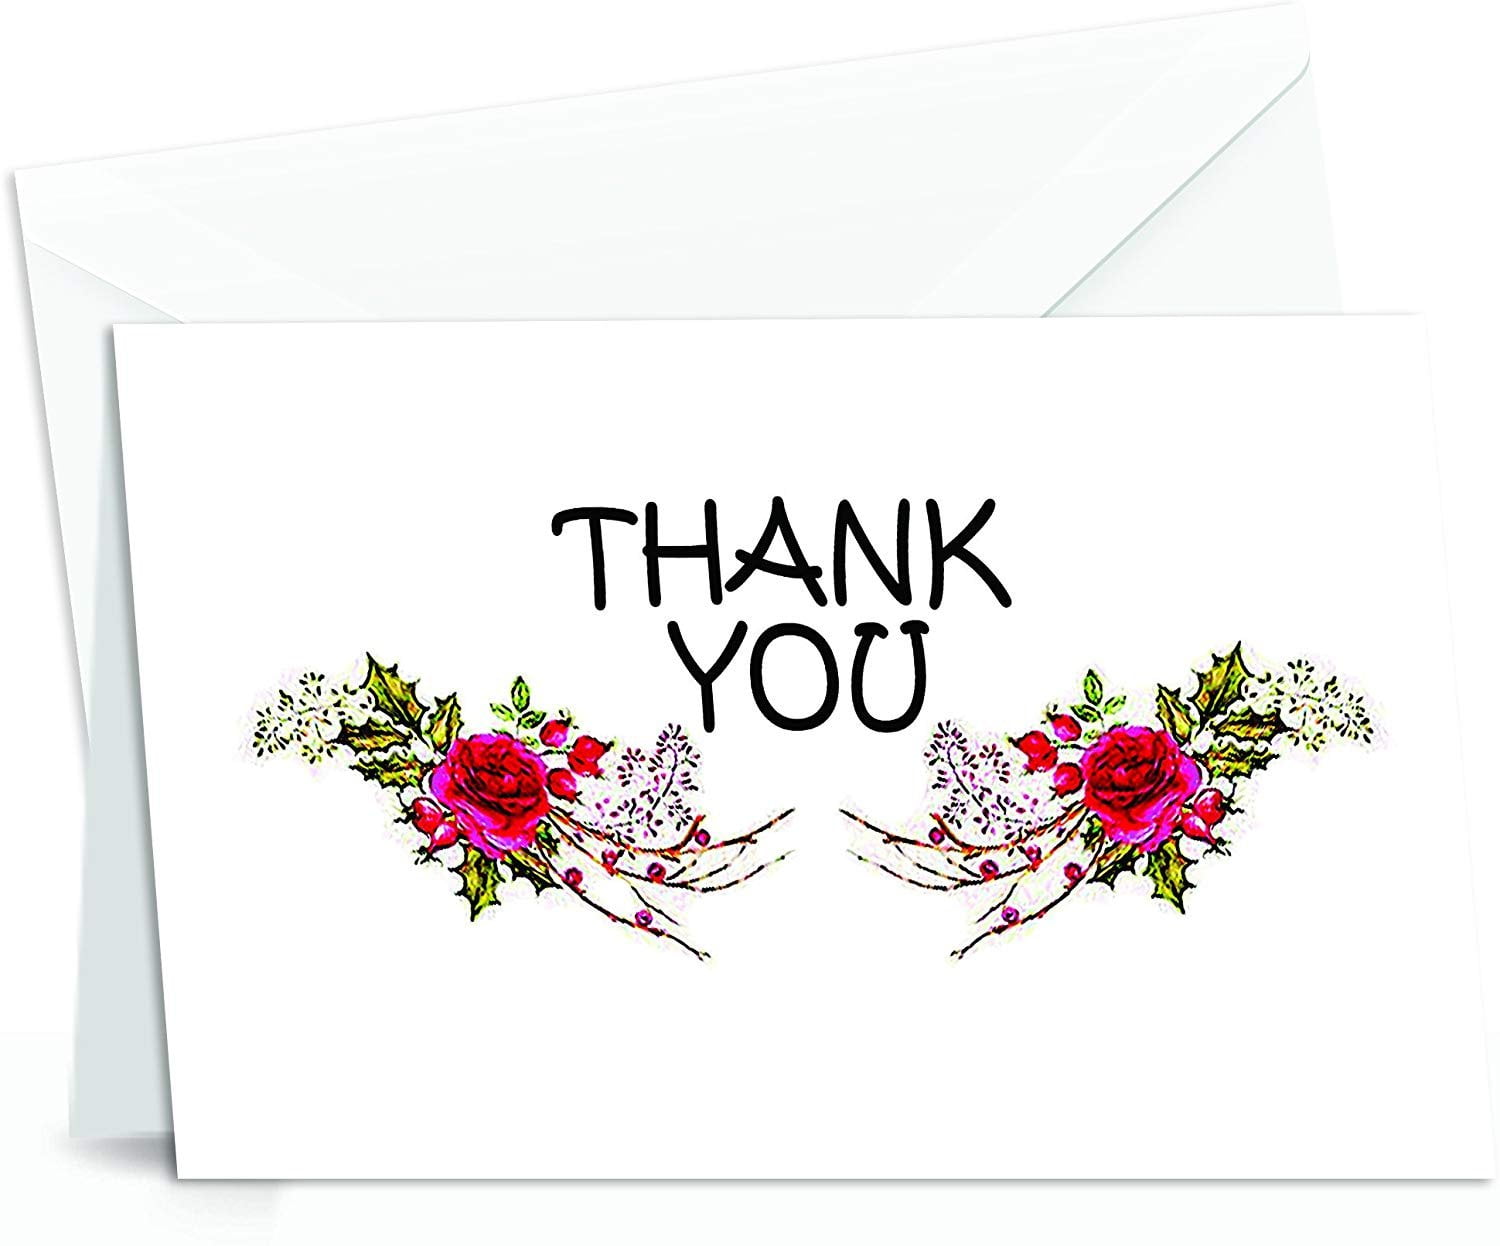  MAGICLULU 150 Pcs Blank Card Stock White Message Card  Invitation Card Blank Poker Cards Note Cards Stationery Thank You Cards  Blank Bookmarks Blank Cards Bulk Thick Paper Printable : Office Products